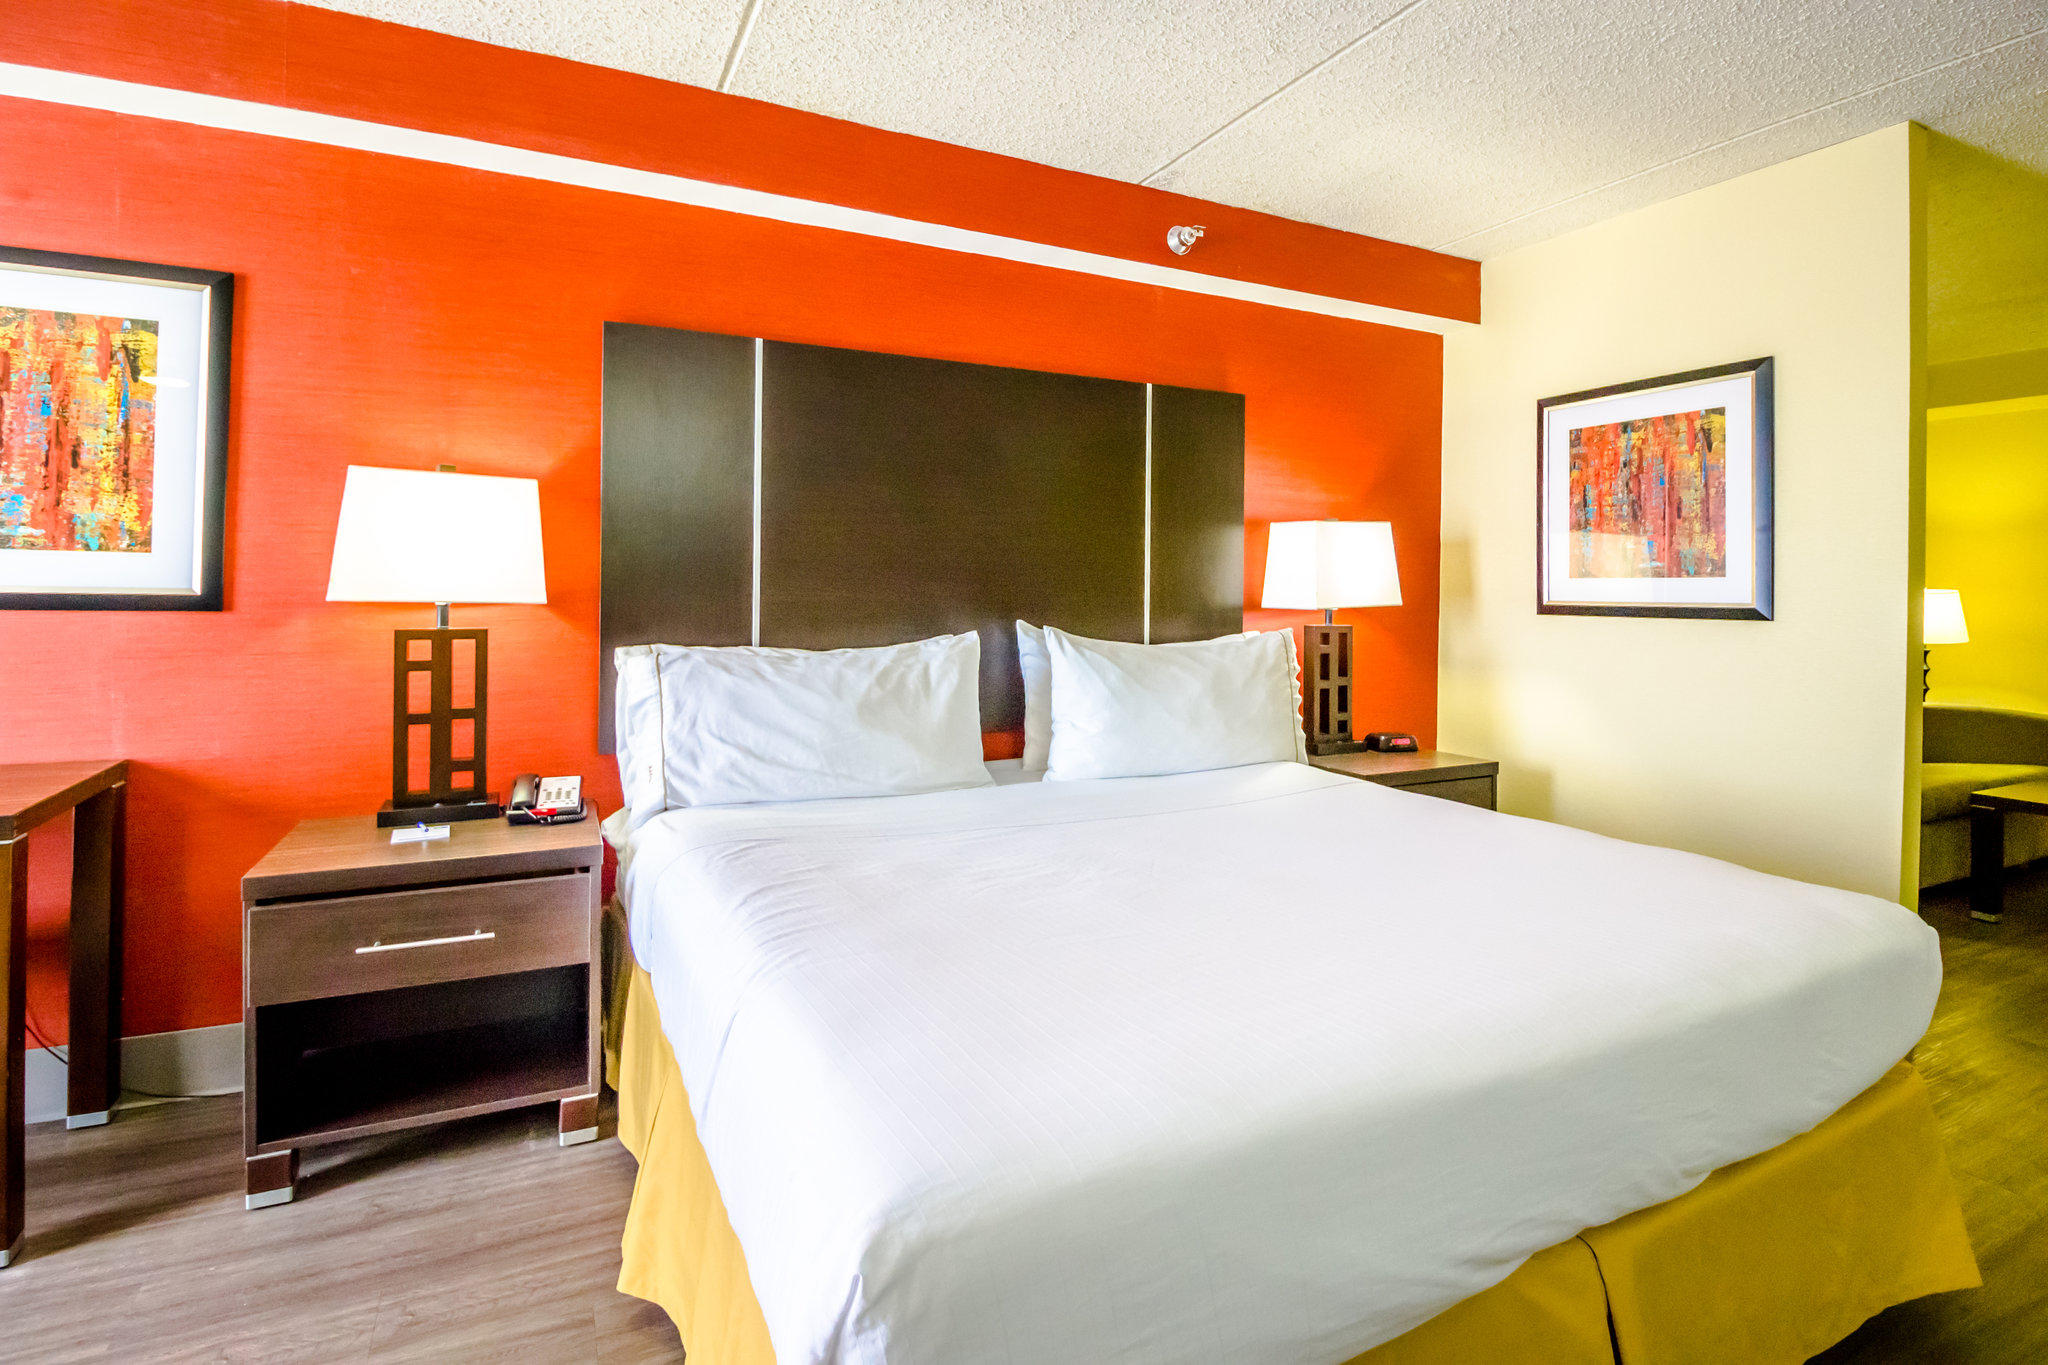 Holiday Inn Express & Suites Austin Airport Photo